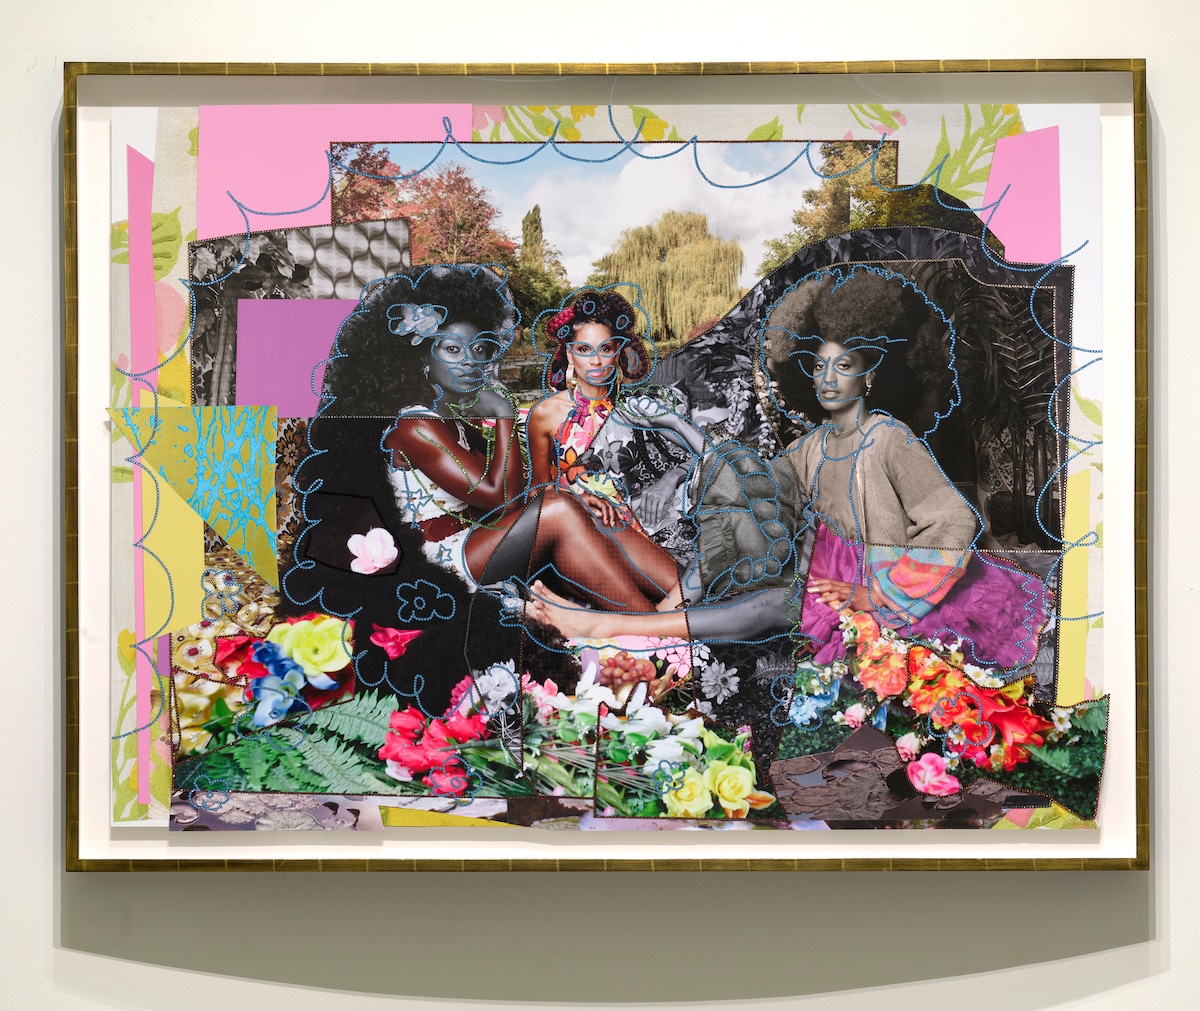 A mixed-media artwork shows three women with dark skin tones sitting in a park and looking at the viewer. The women’s figures are made of cut-out photographs in color as well as black and white, decorated with rhinestones. They are central in a collage that features a photograph of a park and shapes in colorful paper.